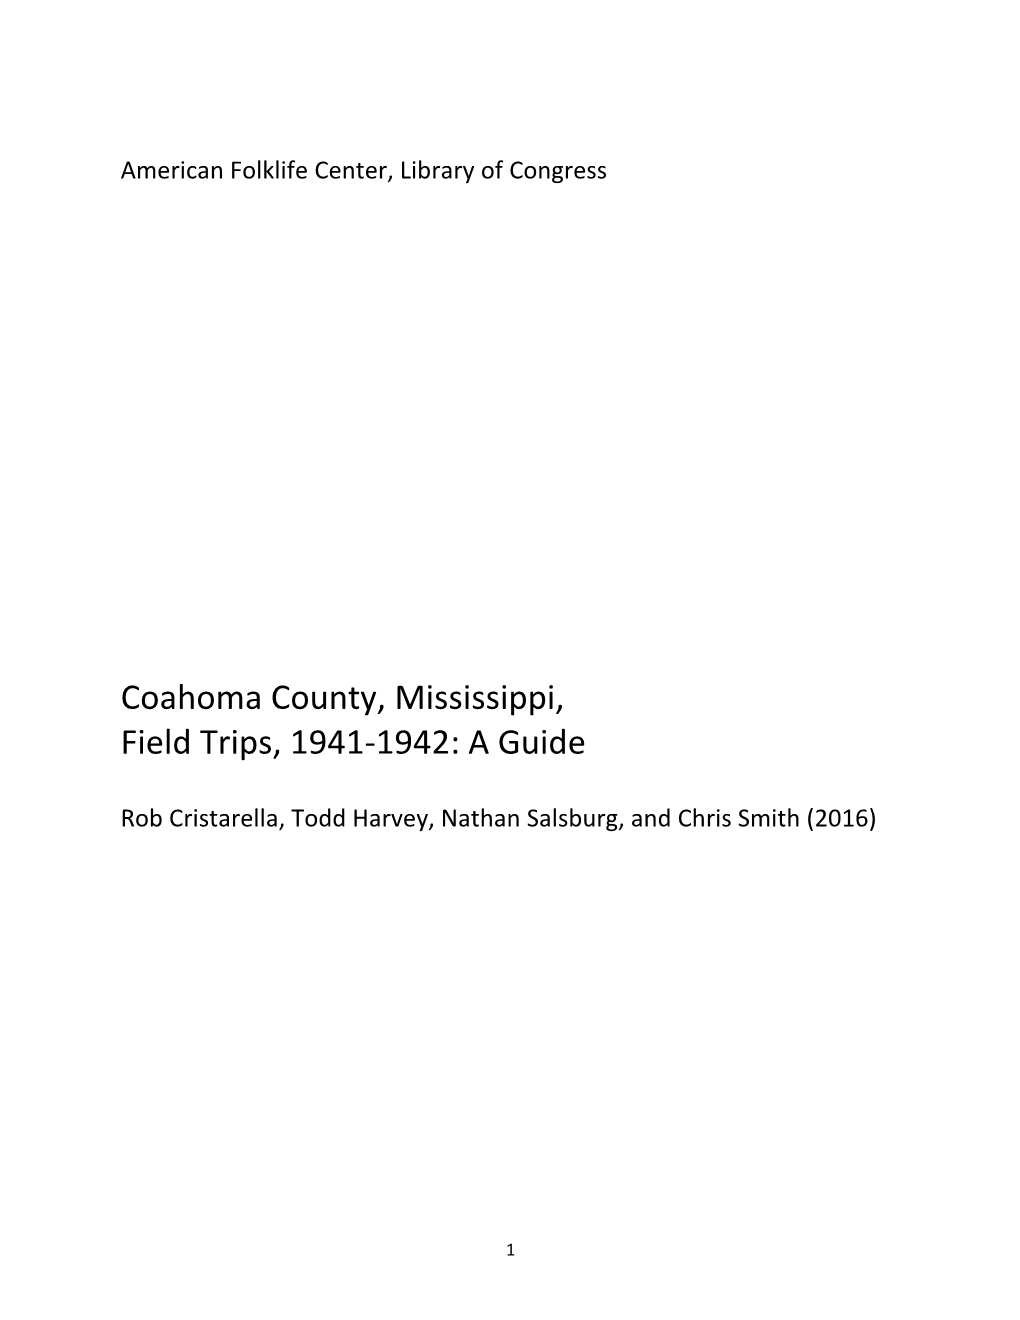 Coahoma County, Mississippi, Field Trips, 1941-1942: a Guide